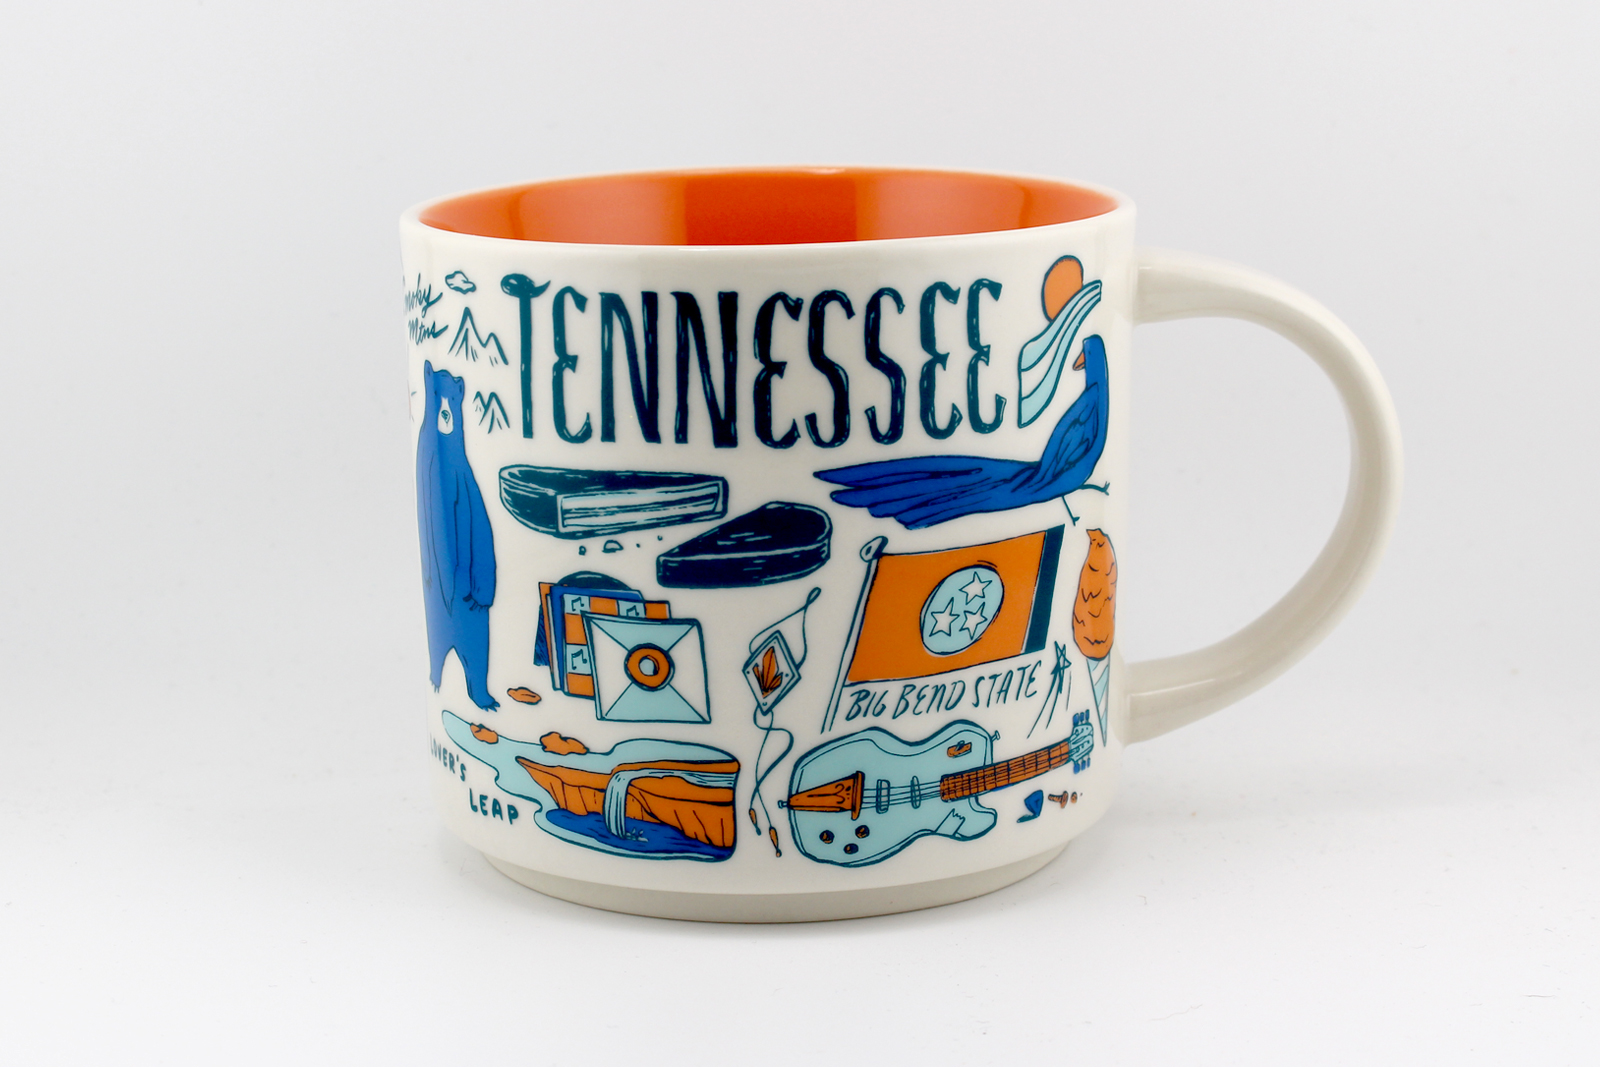 Tennessee Mug: Starbucks Been There Series